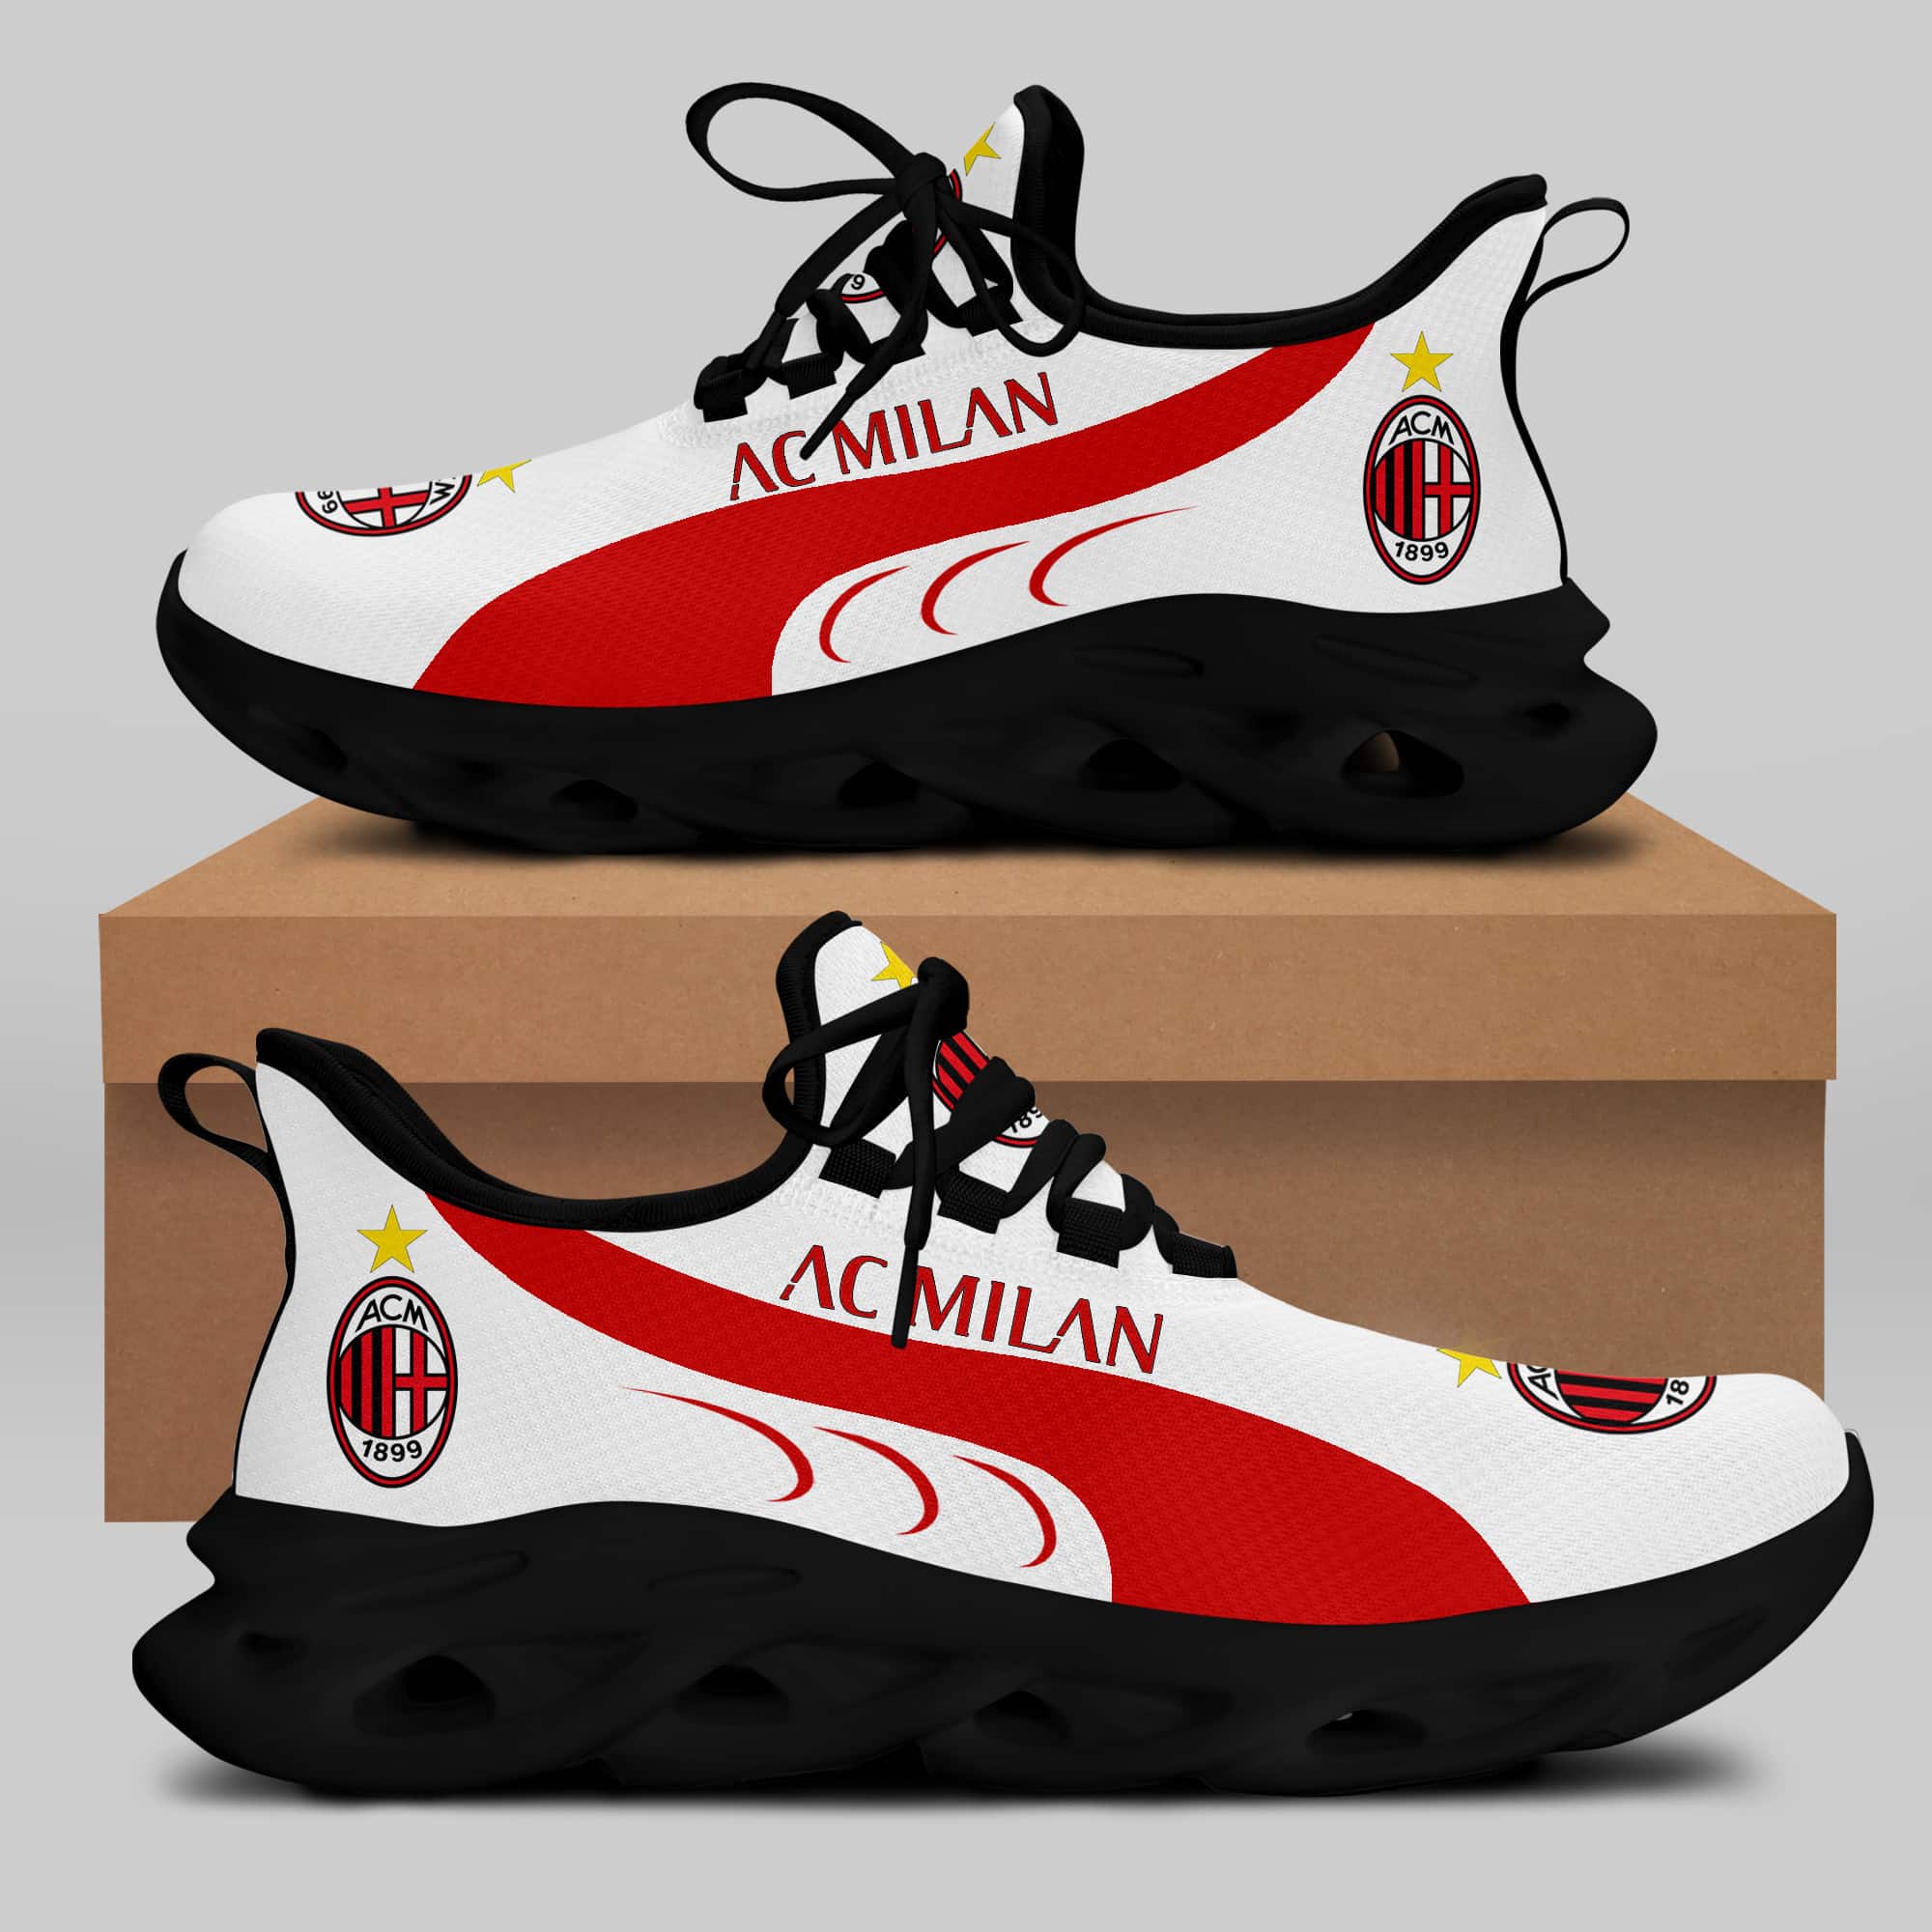 Ac Milan Running Shoes Max Soul Shoes Sneakers Ver 4 2